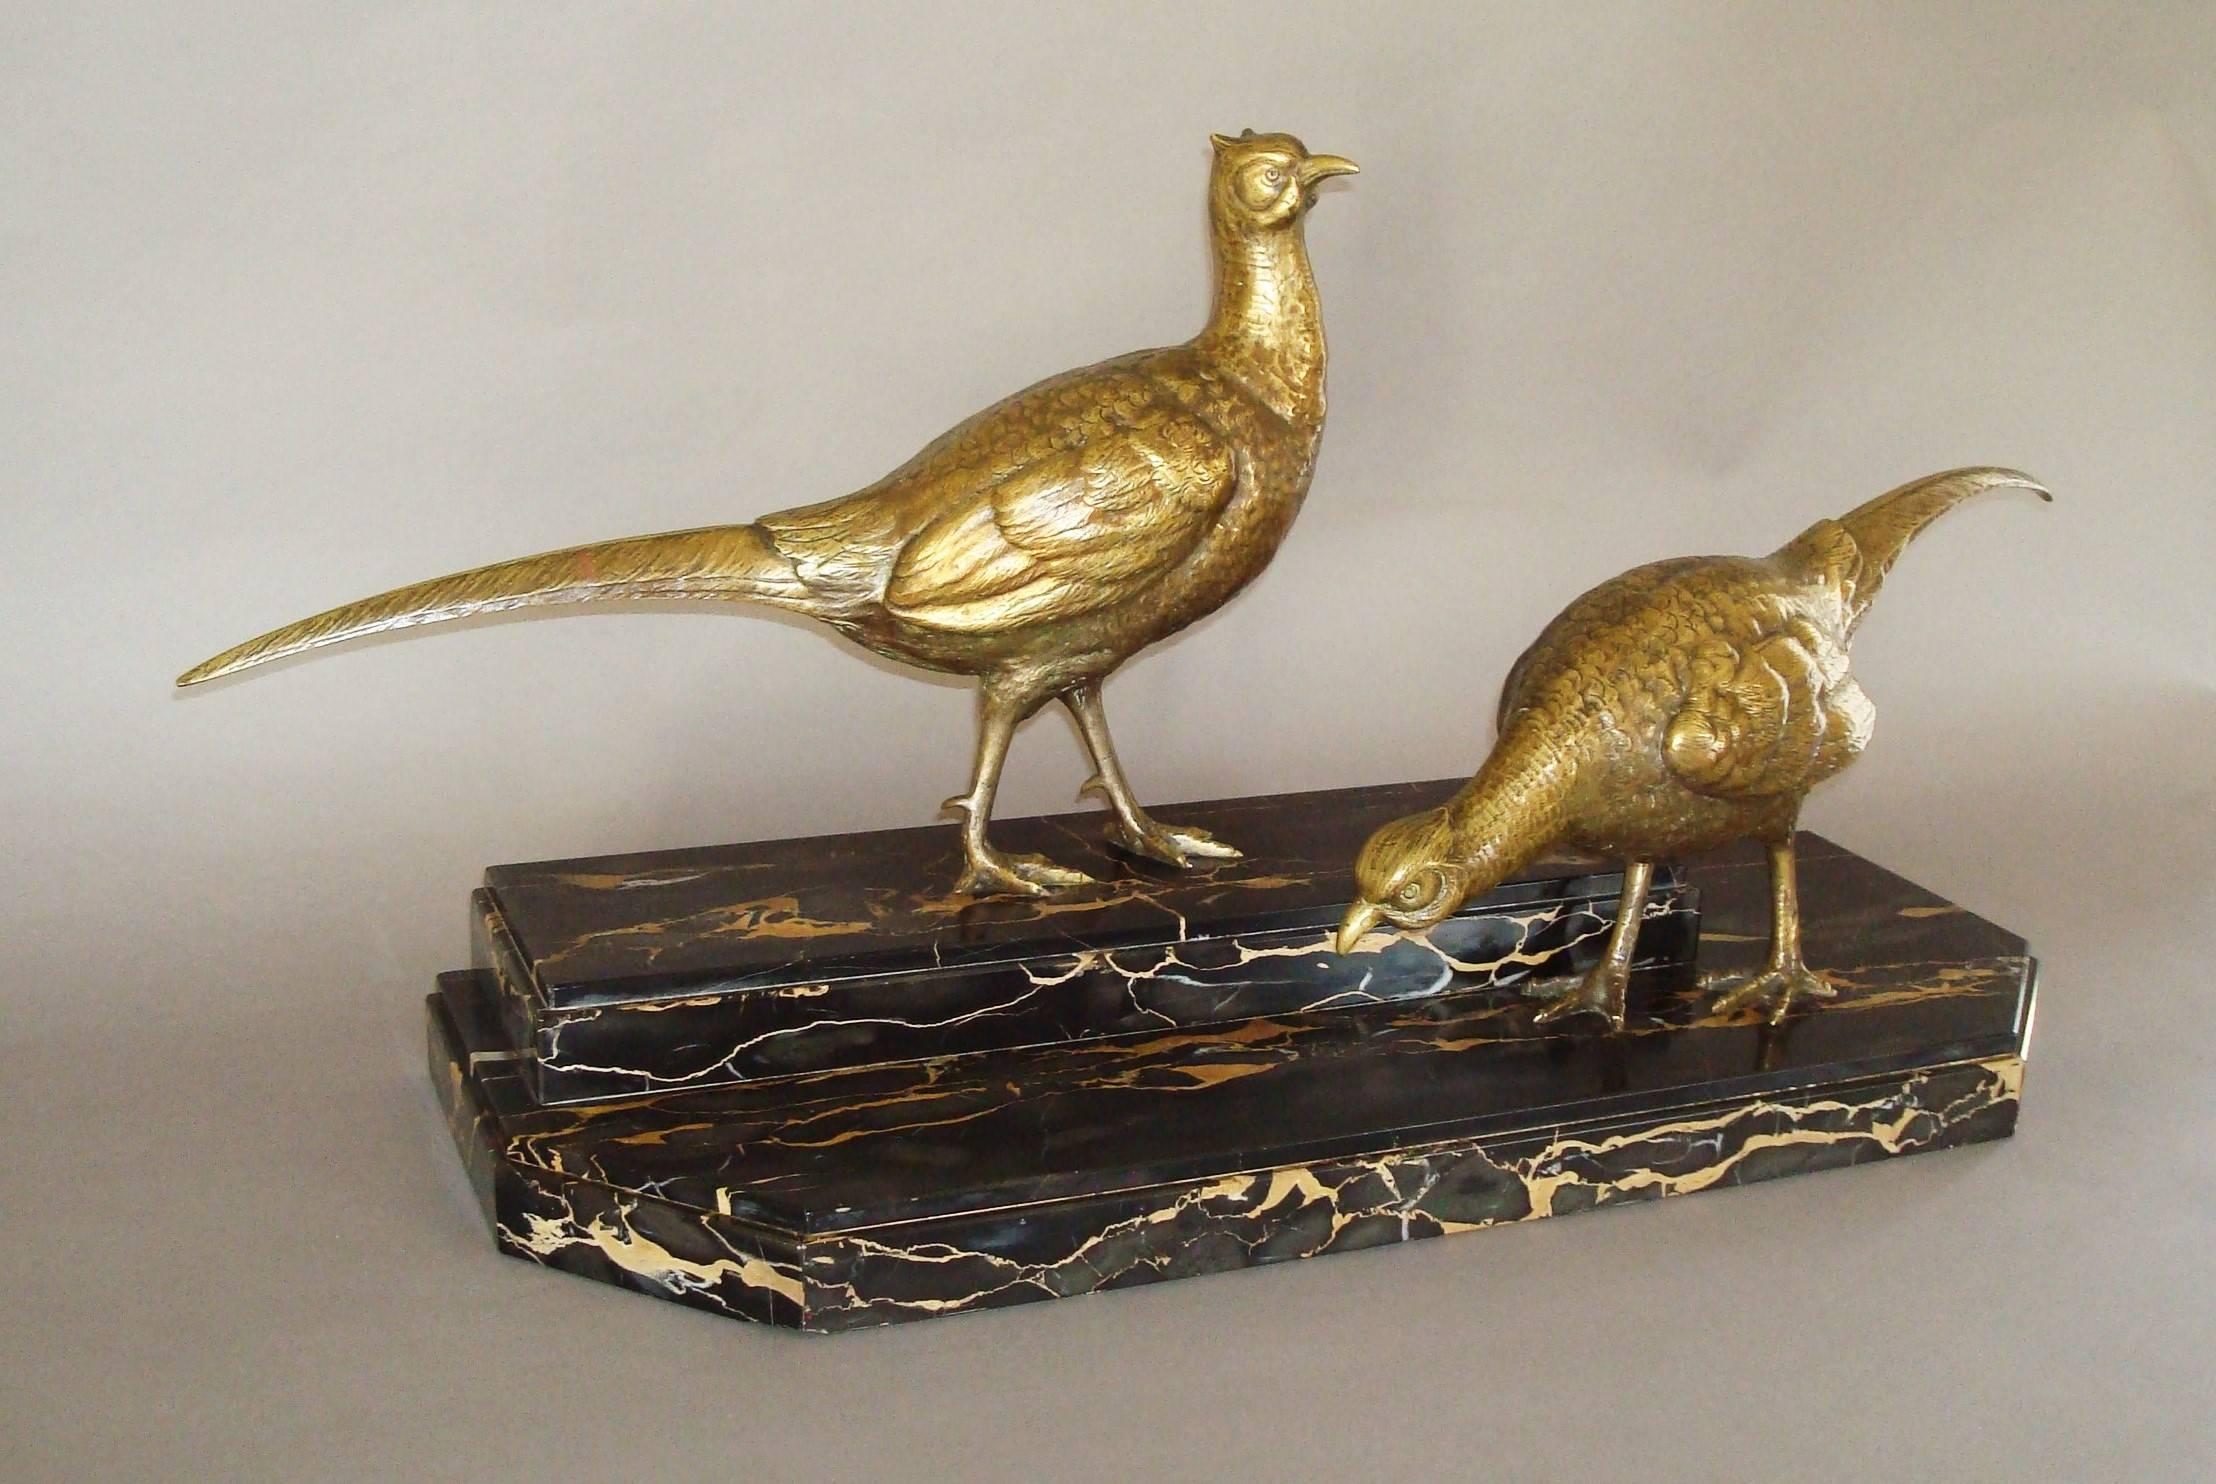 Early 20th century large pair of gilt bronze pheasants by Ignacio Gallo. The two gilt bronze cock pheasants, one alert, the other foraging, raised on a substantial Porto marble stepped base with canted front corners and a thin moulded edge. Signed